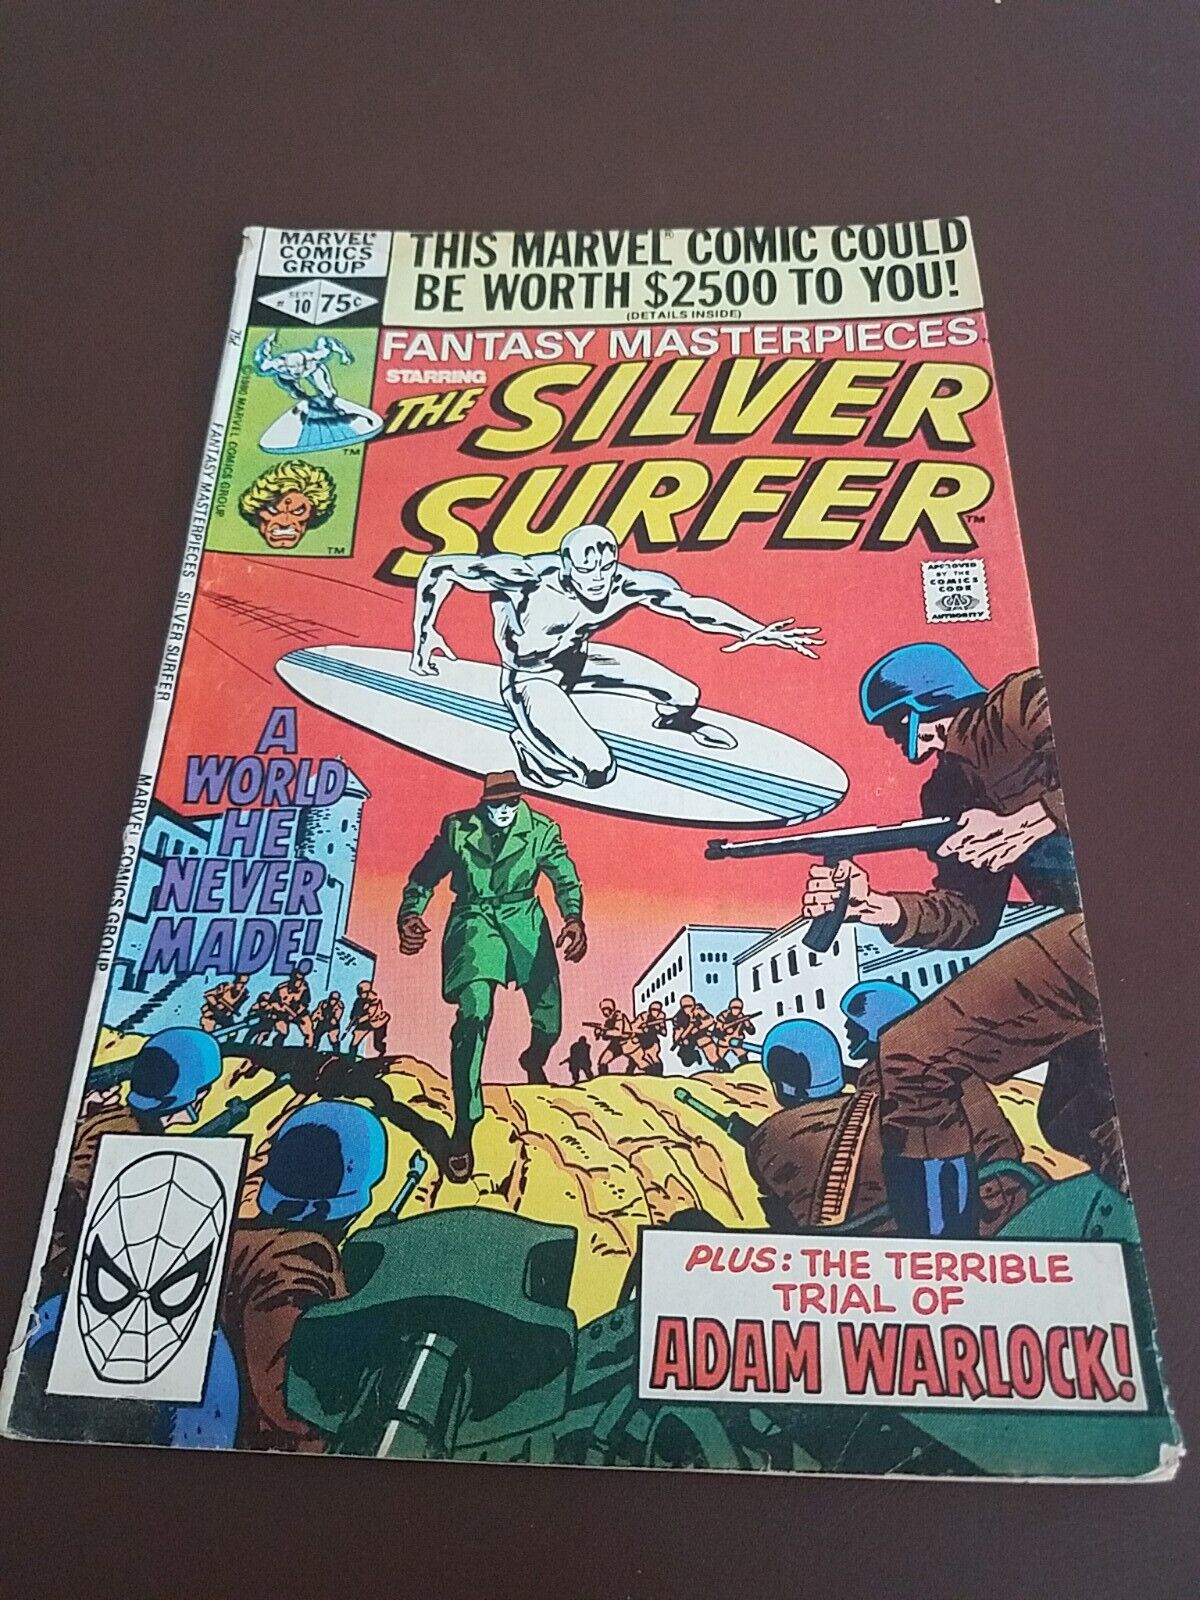 Fantasy Masterpieces The Silver Surfer #10 1980 Reprint 3.5 VG- Combined Ship